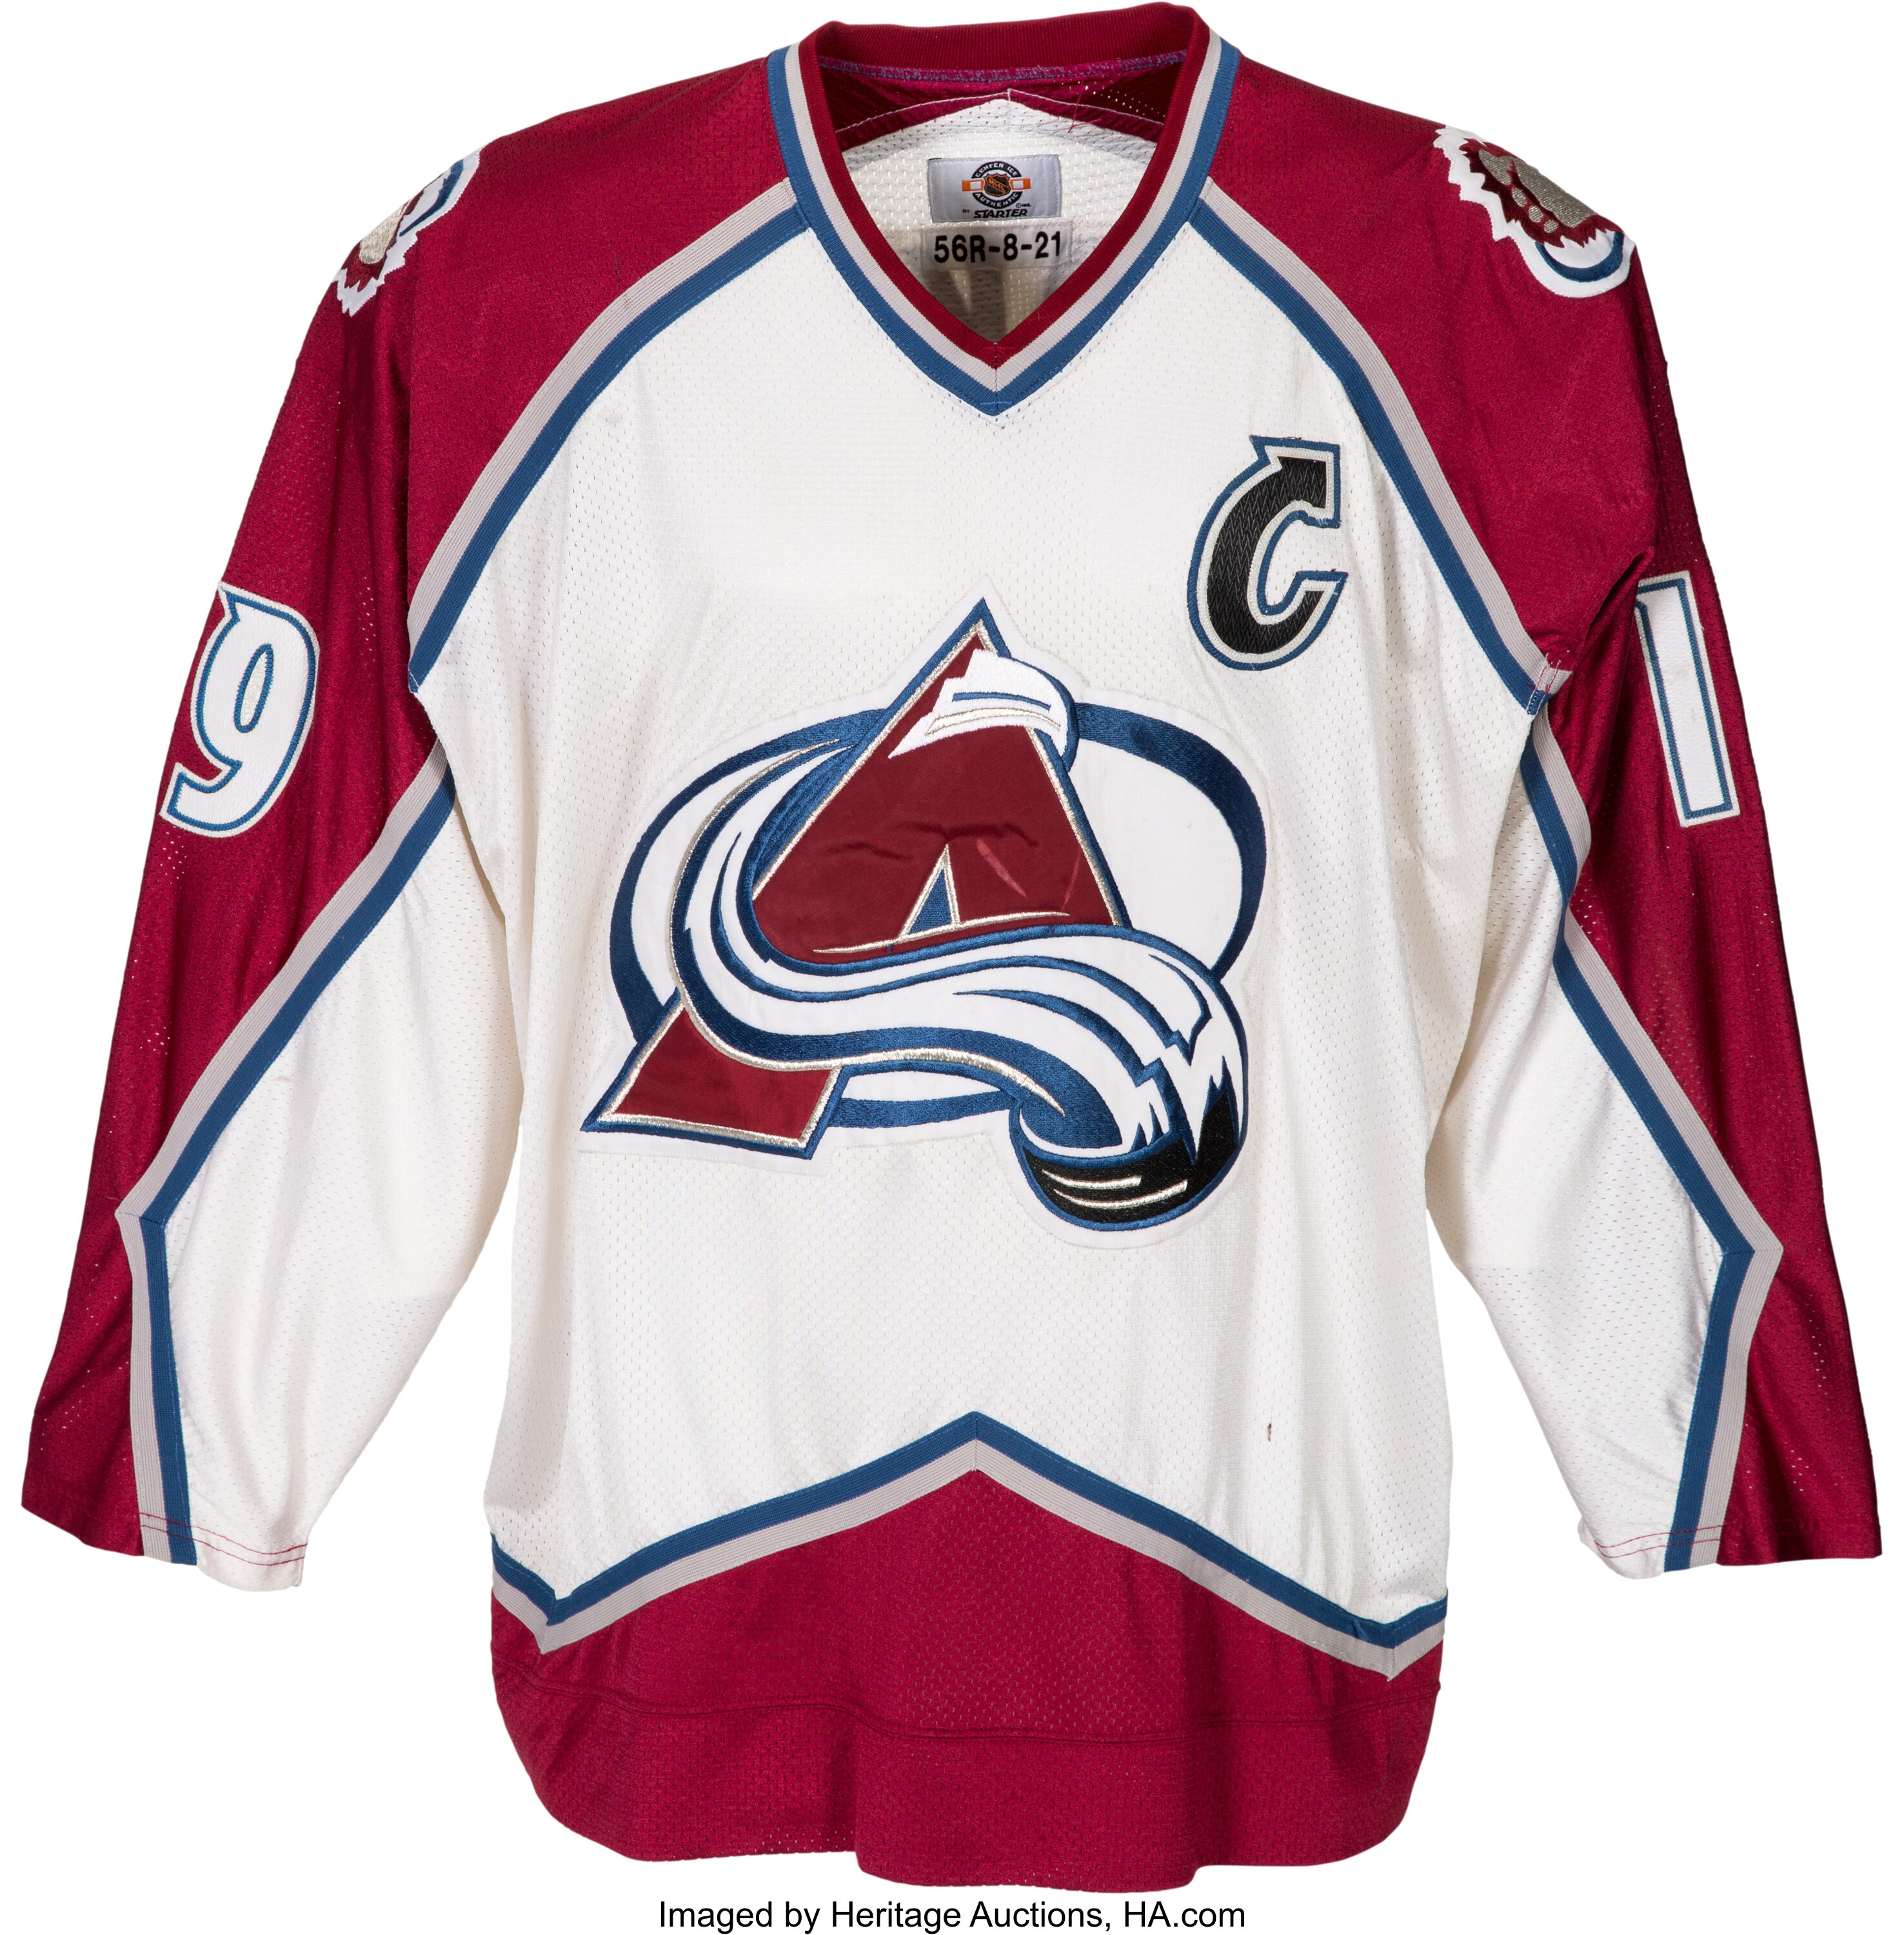 Following the hot trend, Joe Sakic joins the Avalanche front